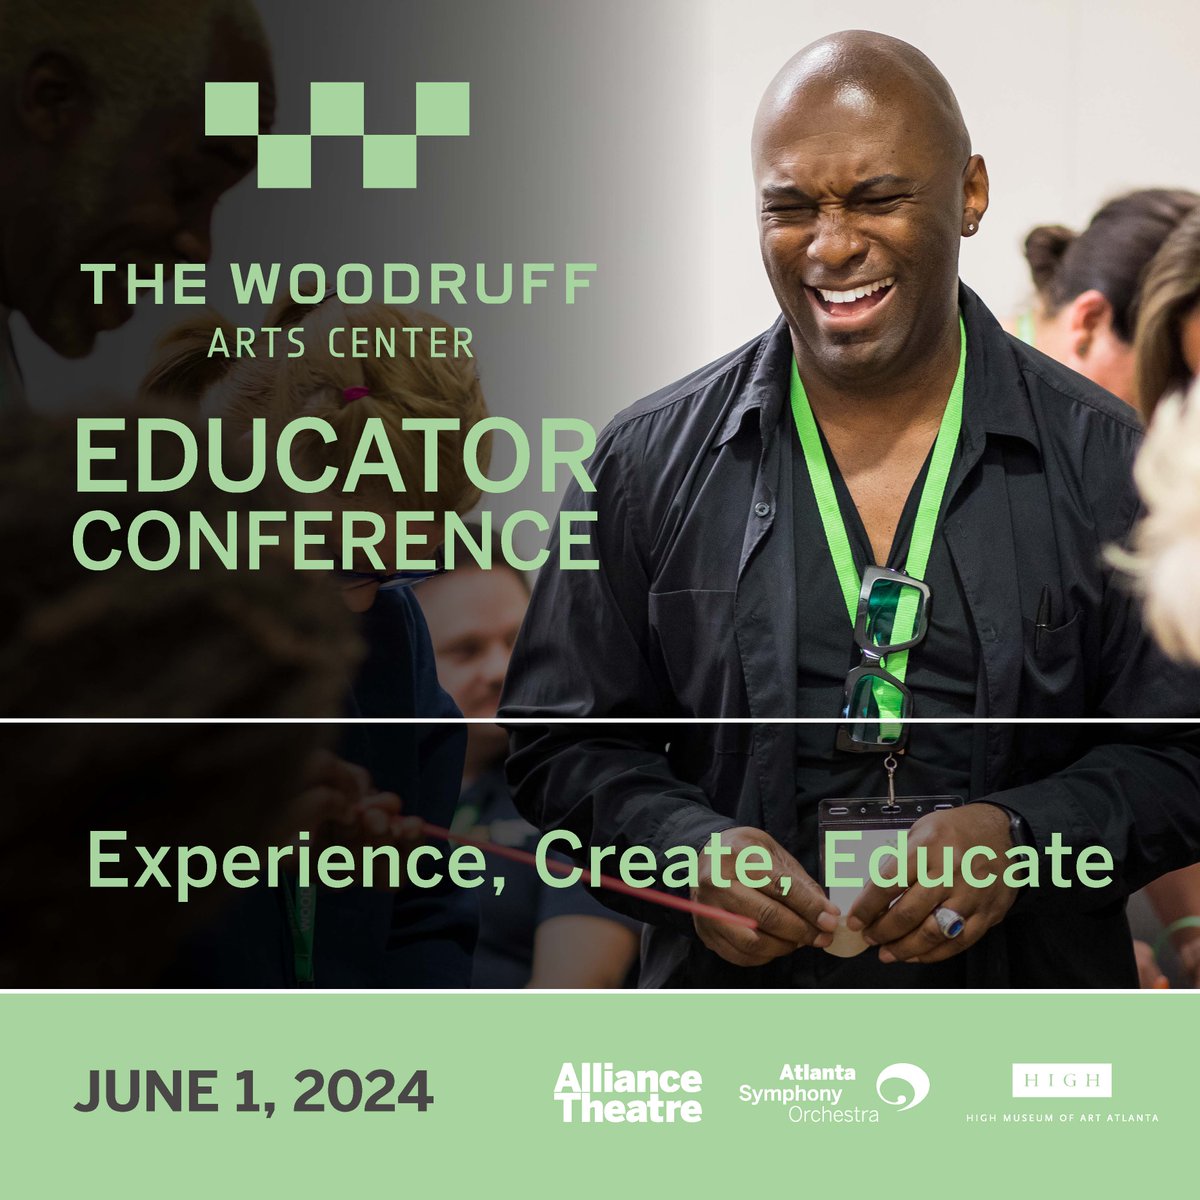 As schools prepare for winter break, the Woodruff Arts Center is thinking about summer! We are excited to announce @TheWoodruff Arts Center Educator Conference on SATURDAY, June 1, 2024. Join us at #WACEdConf24 to 'Experience, Create, Educate.' Registration opens in February!